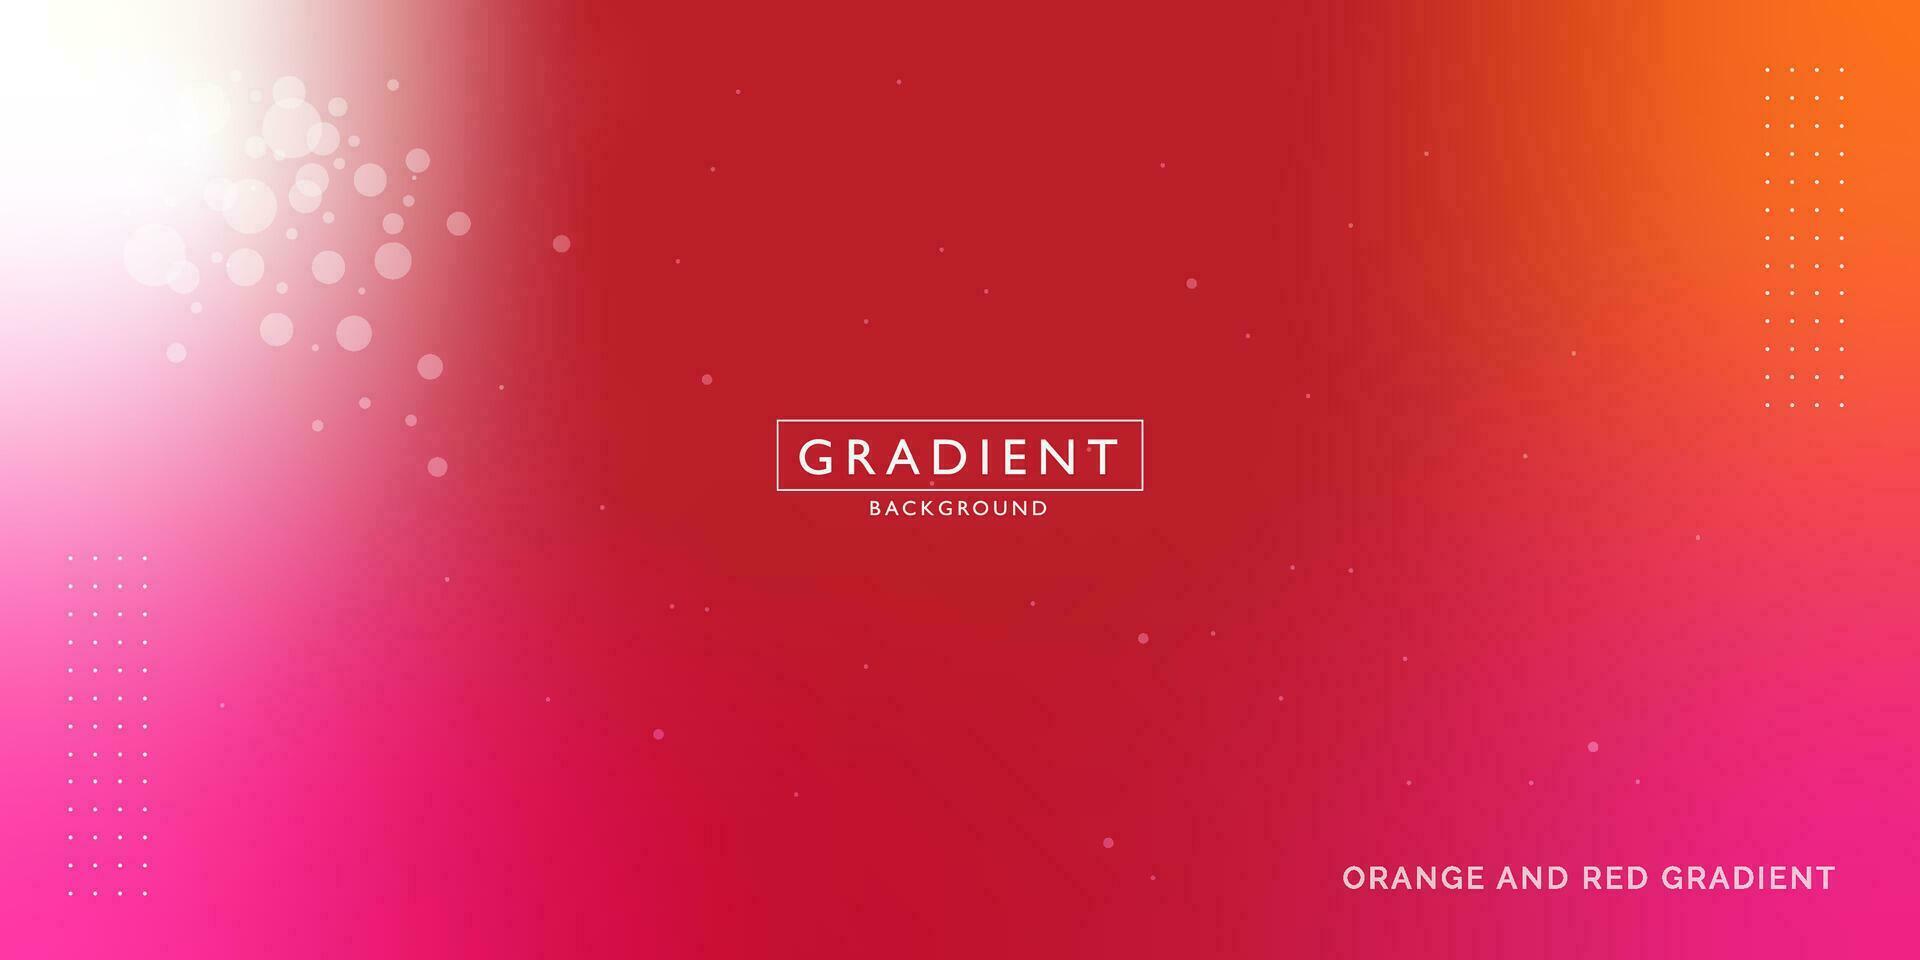 Orange and Red Gradient Background or Gradient Abstract Background or Full Color Abstract Background vector